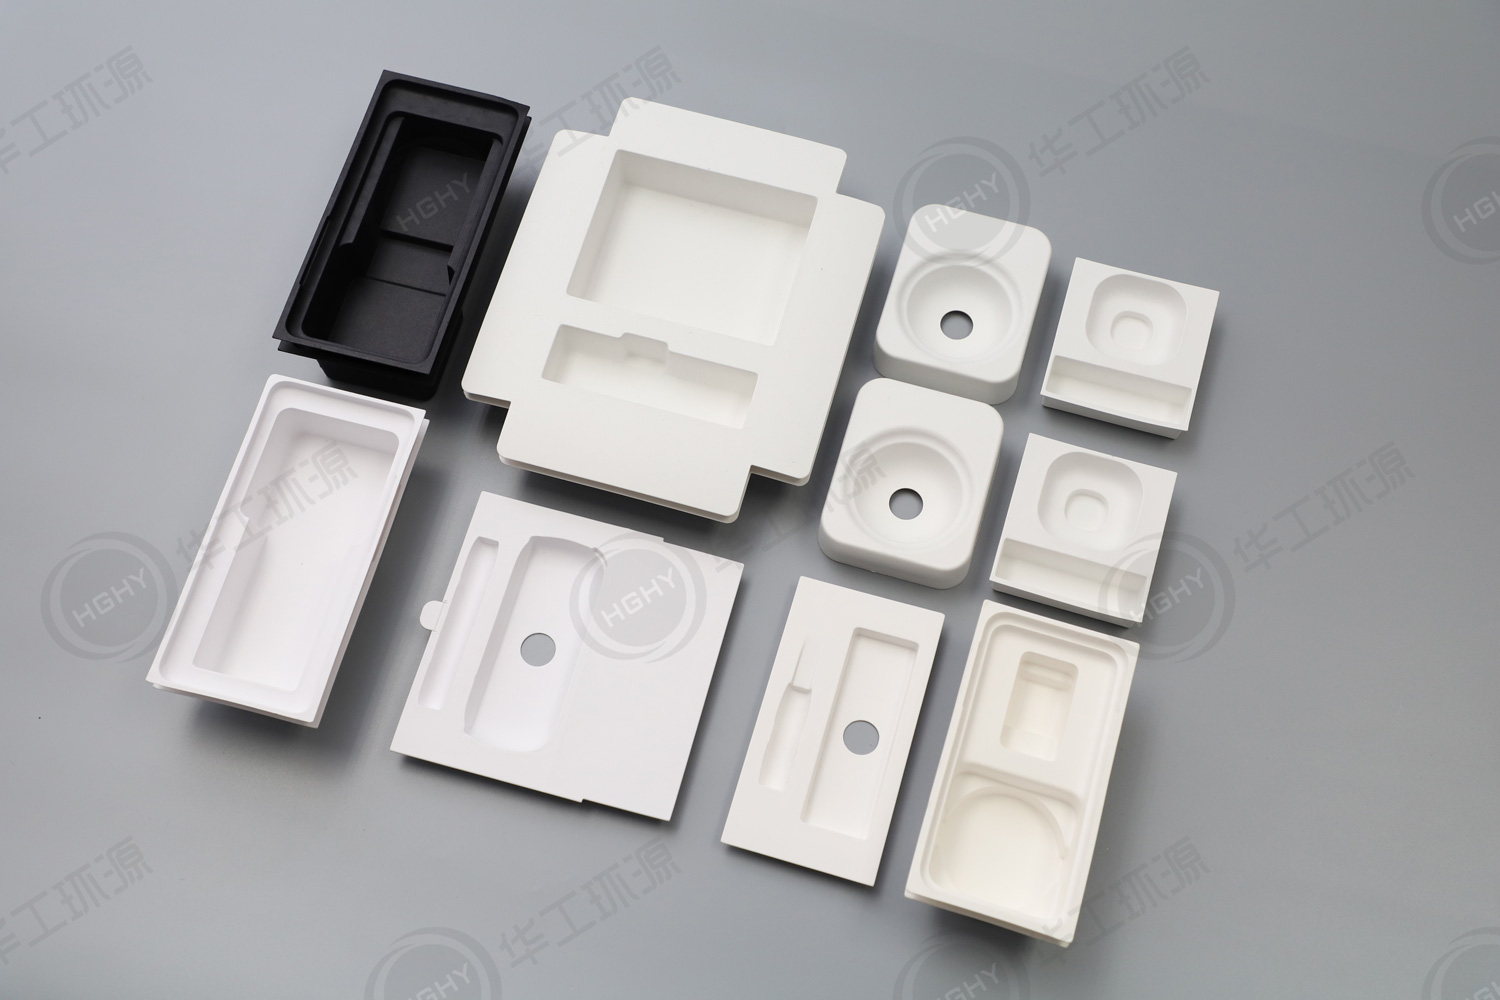 HGHY pulp molding packaging